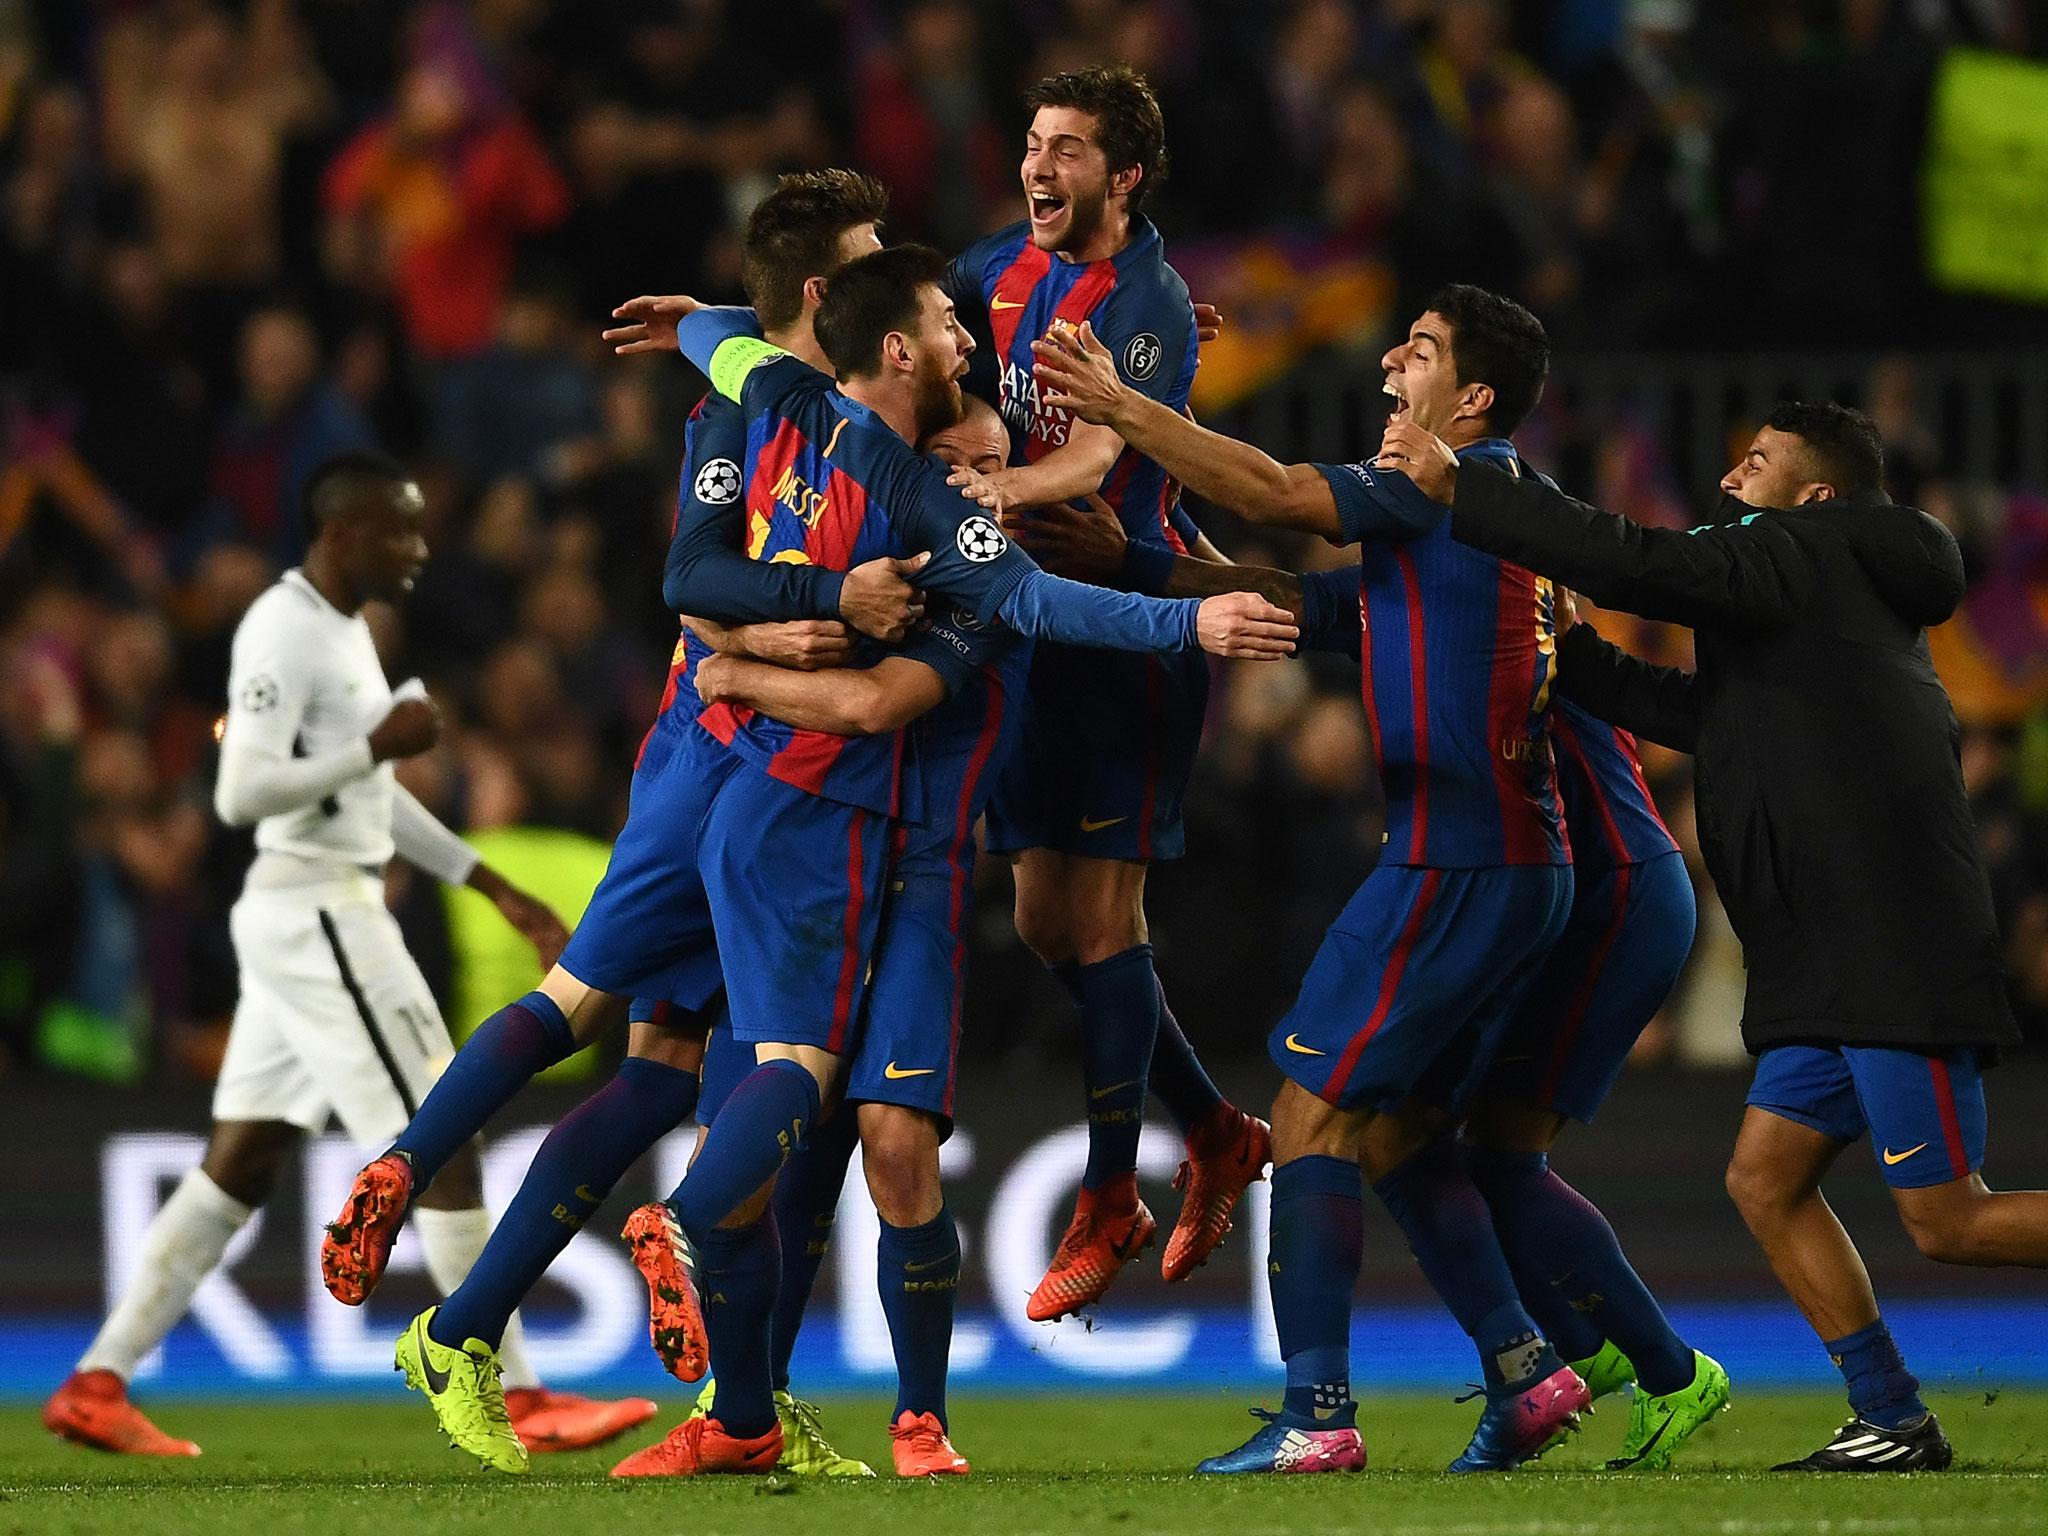 Barcelona beat PSG in one of the best games in European history